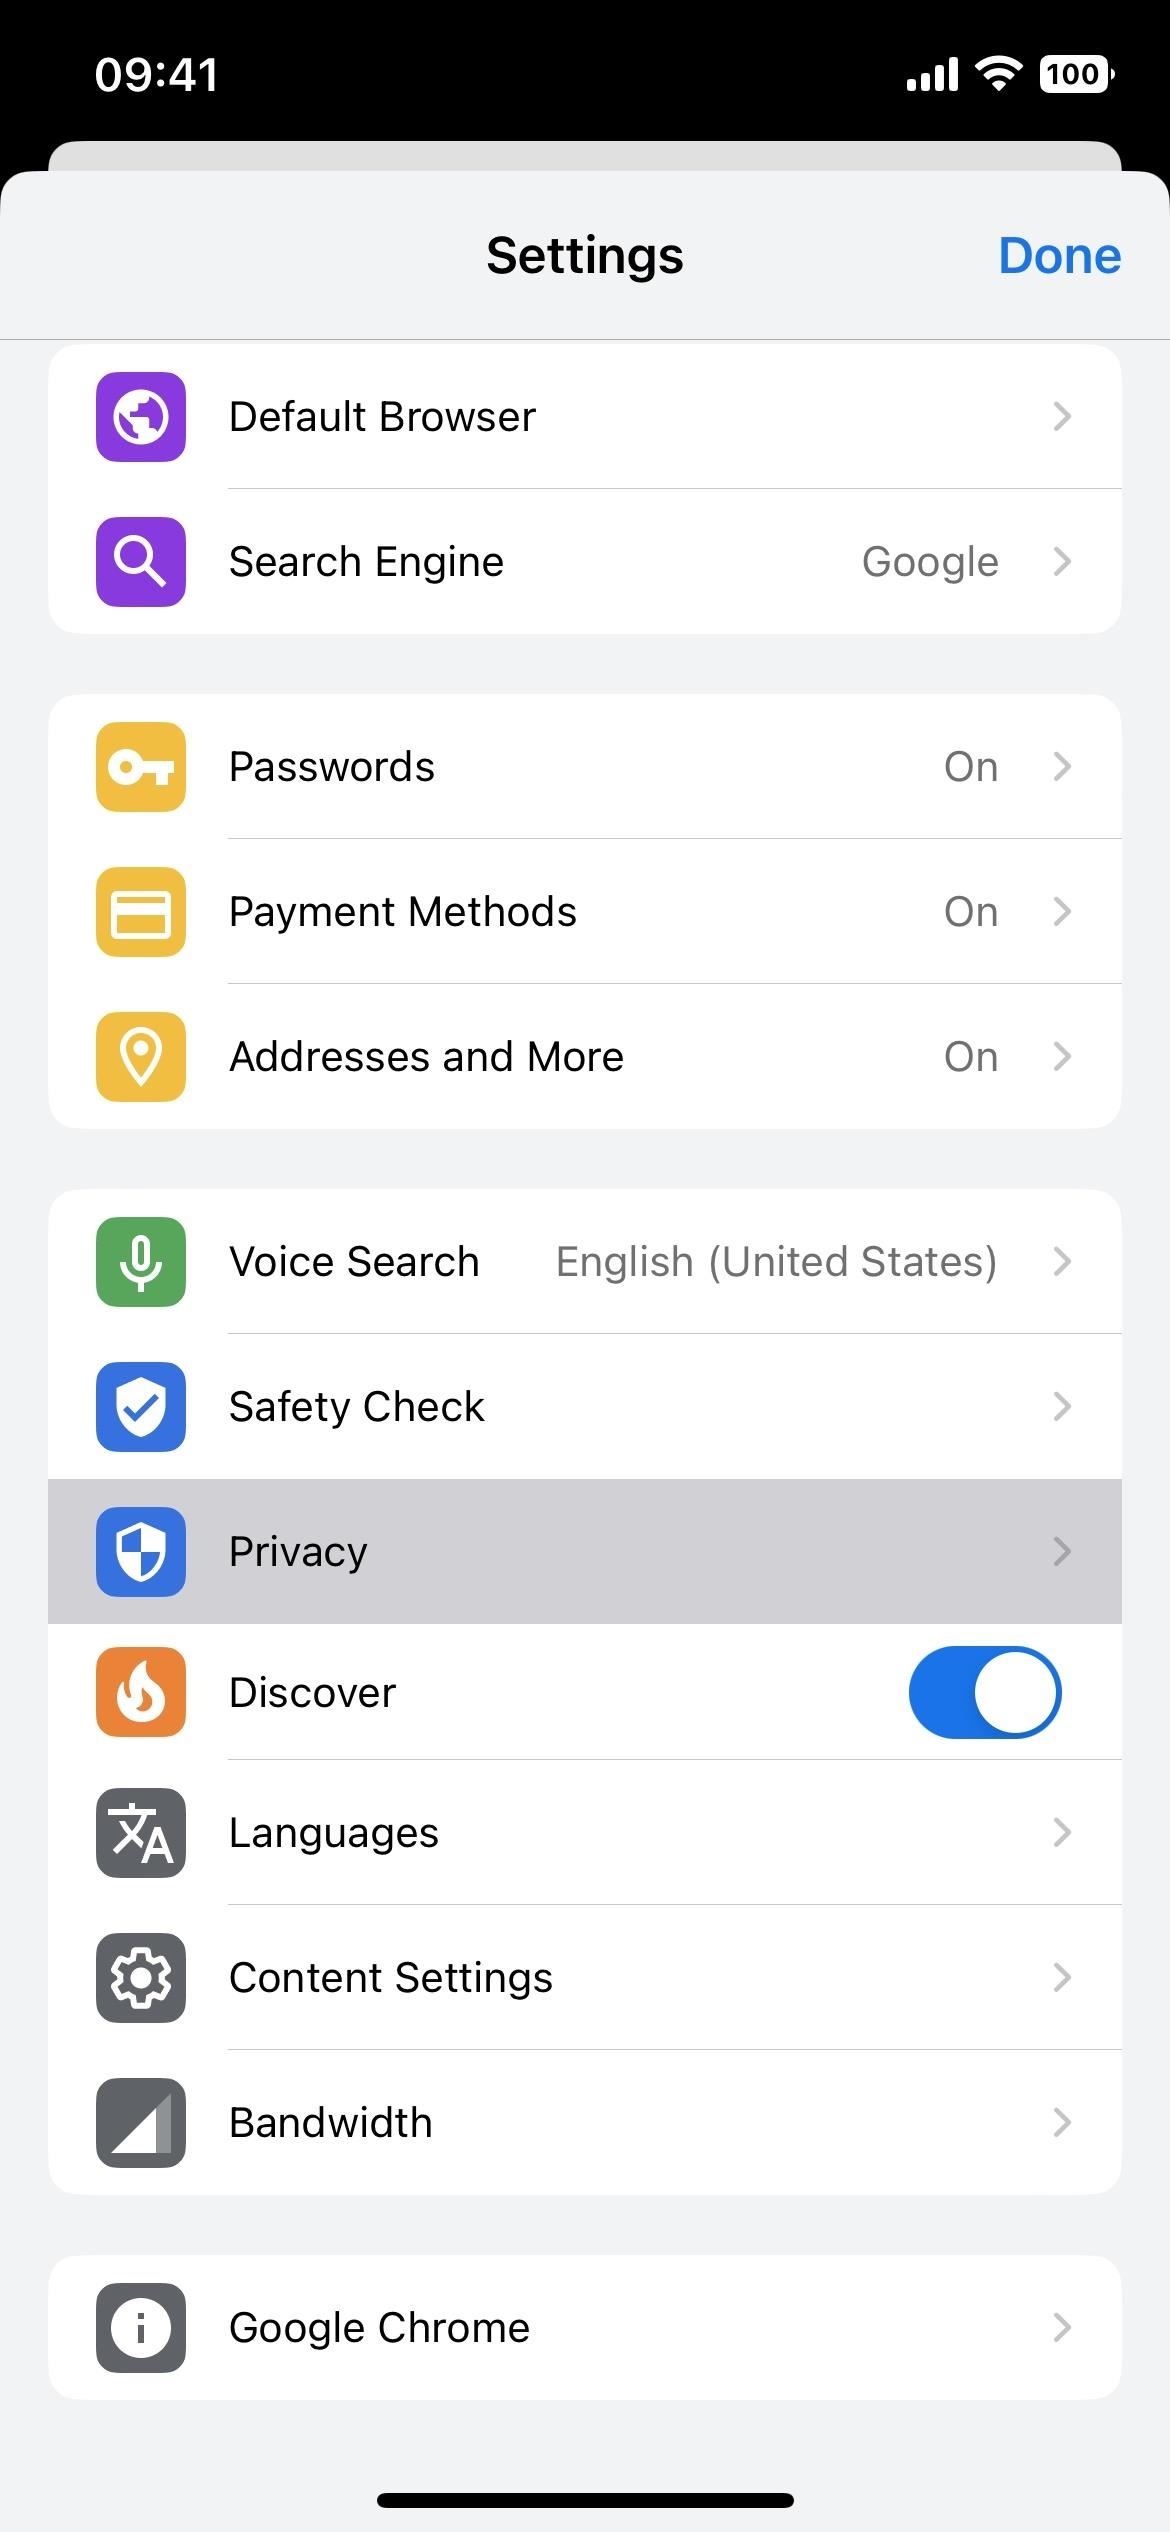 Protect Your Private Tabs with Face ID or Touch ID So Others Can't Snoop Through Your Browsing Secrets